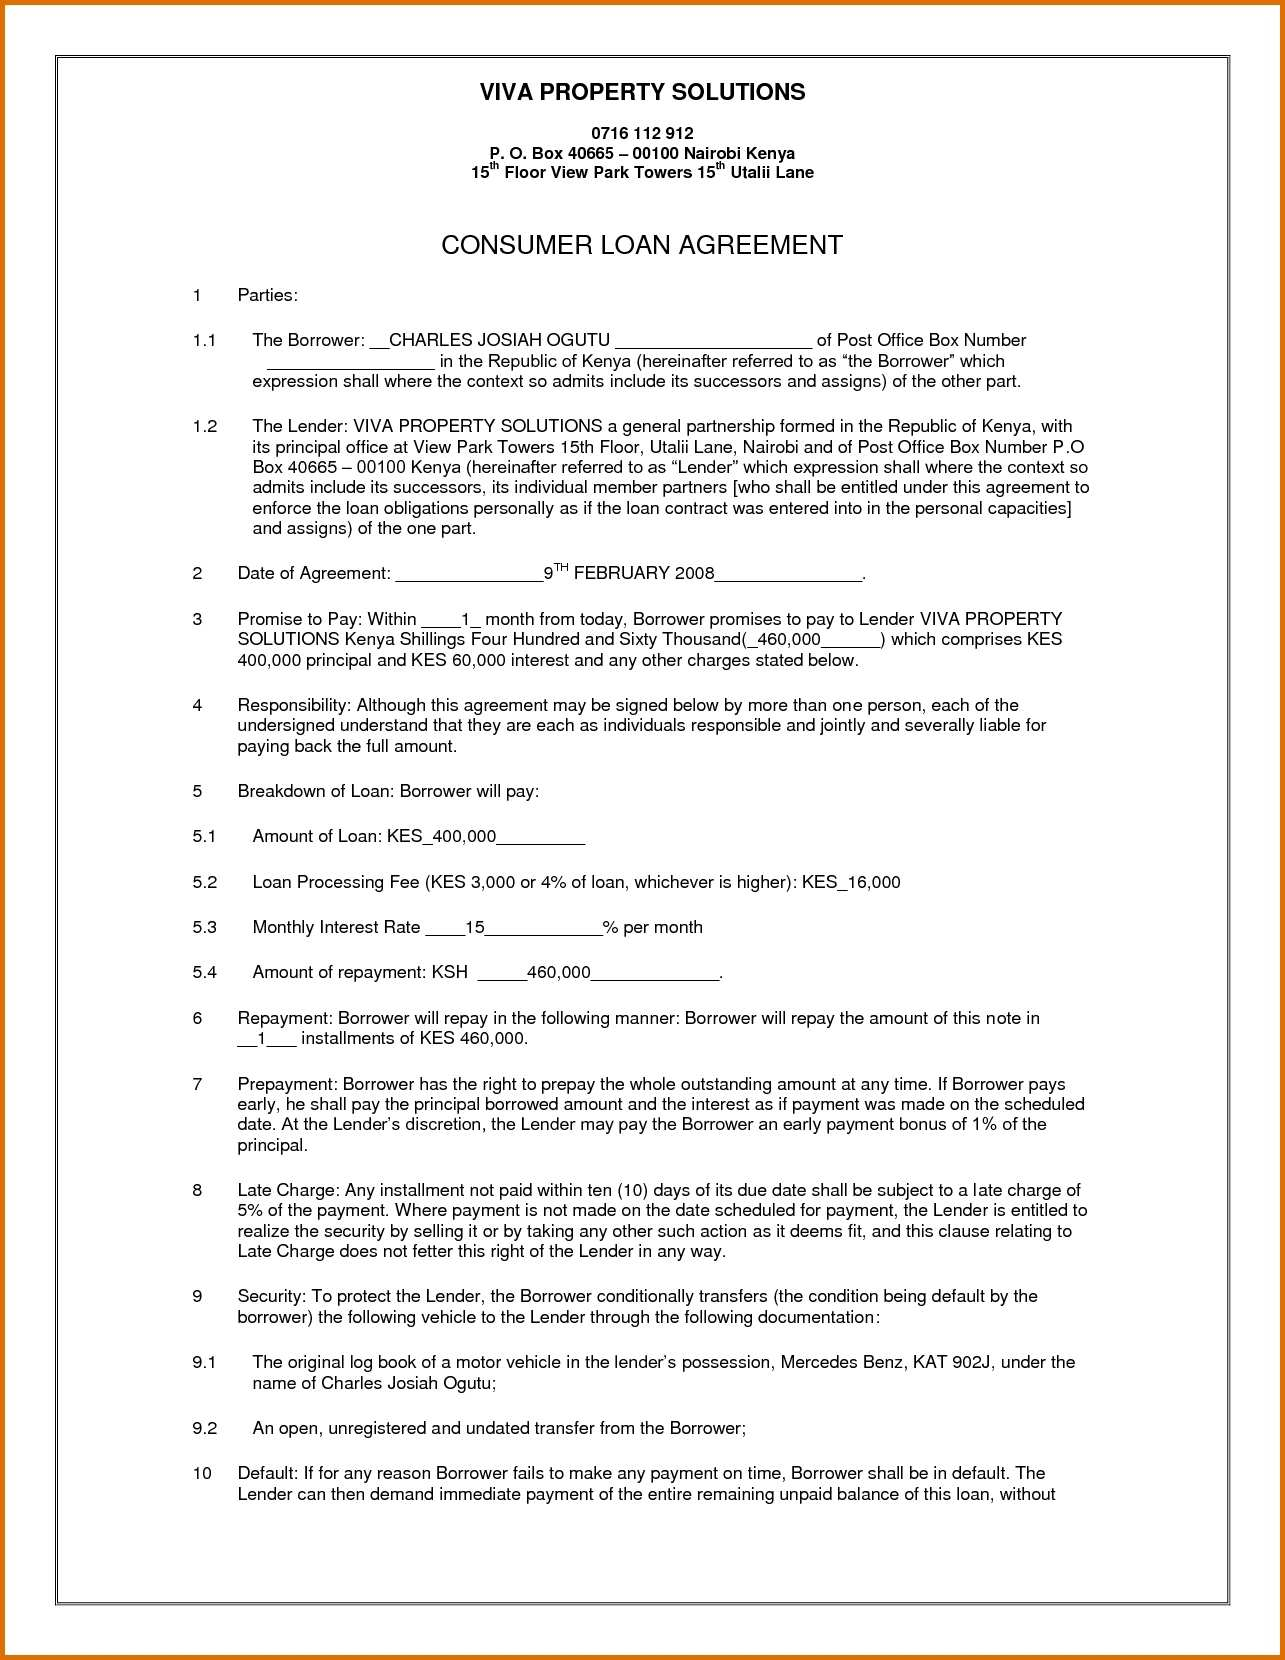 Collateral Loan Agreement Template Legal Simple Collateral Loan Agreement Template Id57152 Opendata